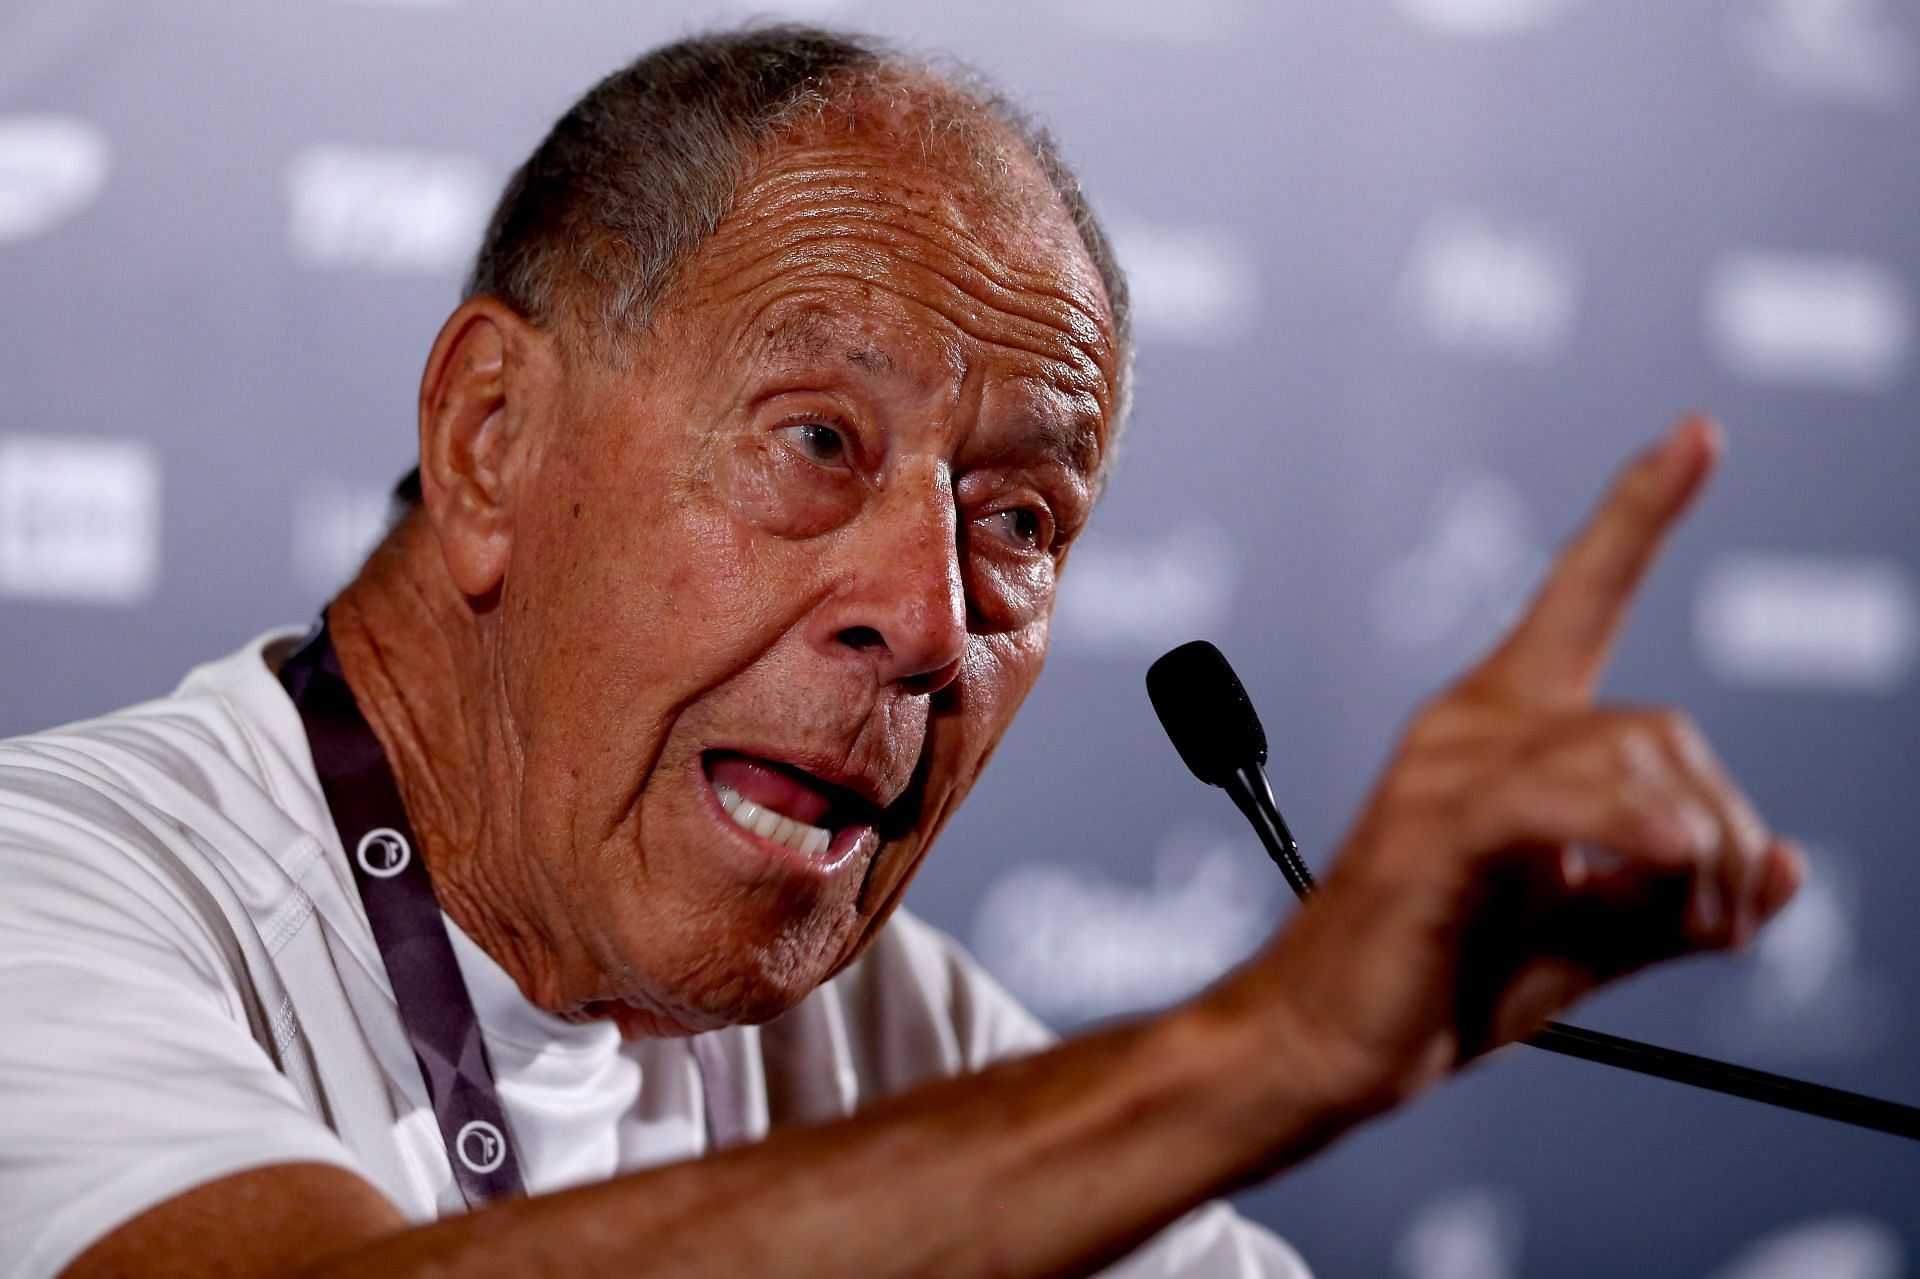 Nick Bollettieri was a highly-respected tennis coach, primarily in the USA.